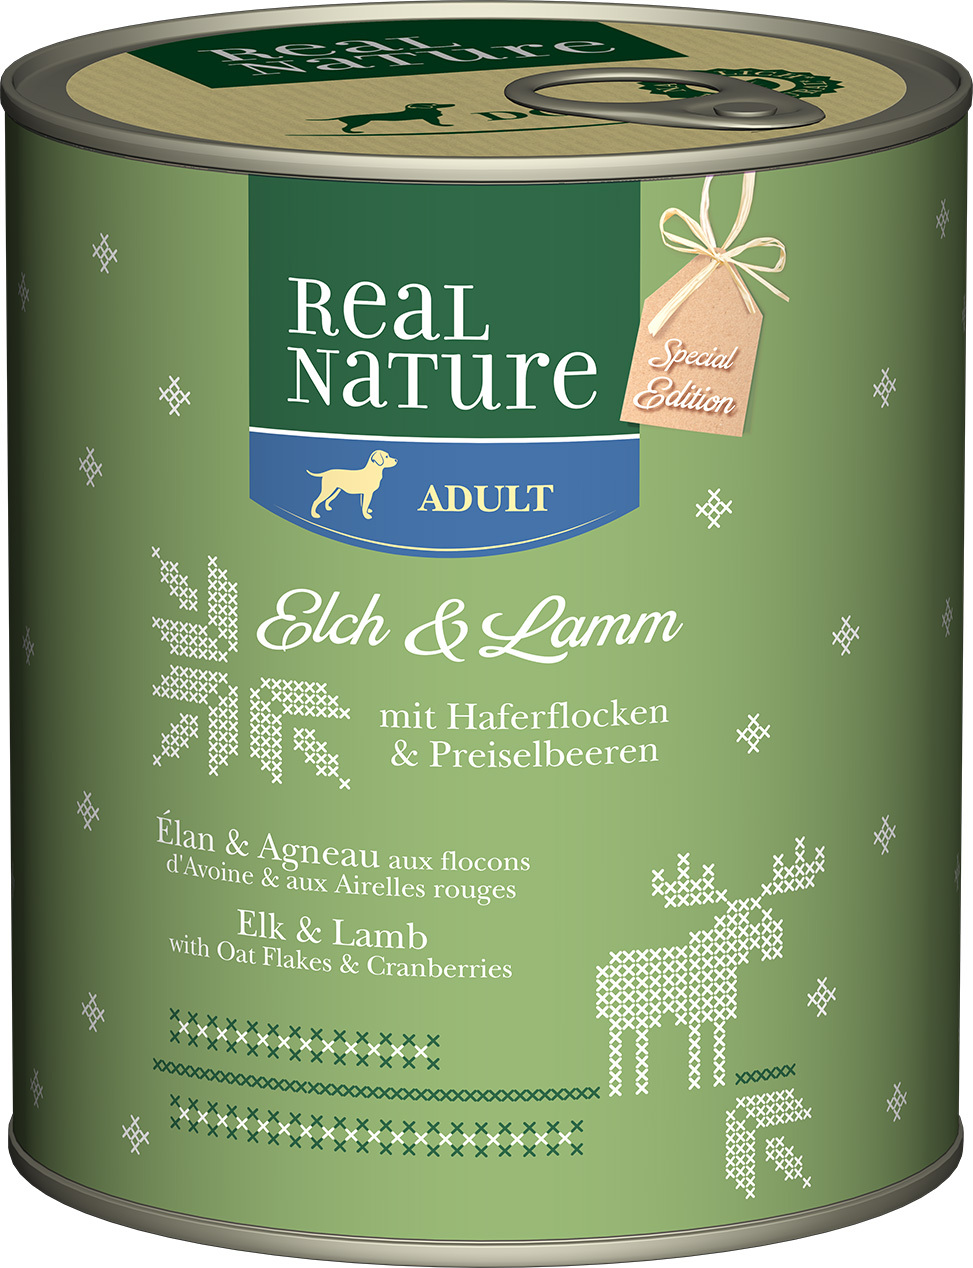 REAL NATURE Adult 6x800g Special Edition: Elch & Lamm